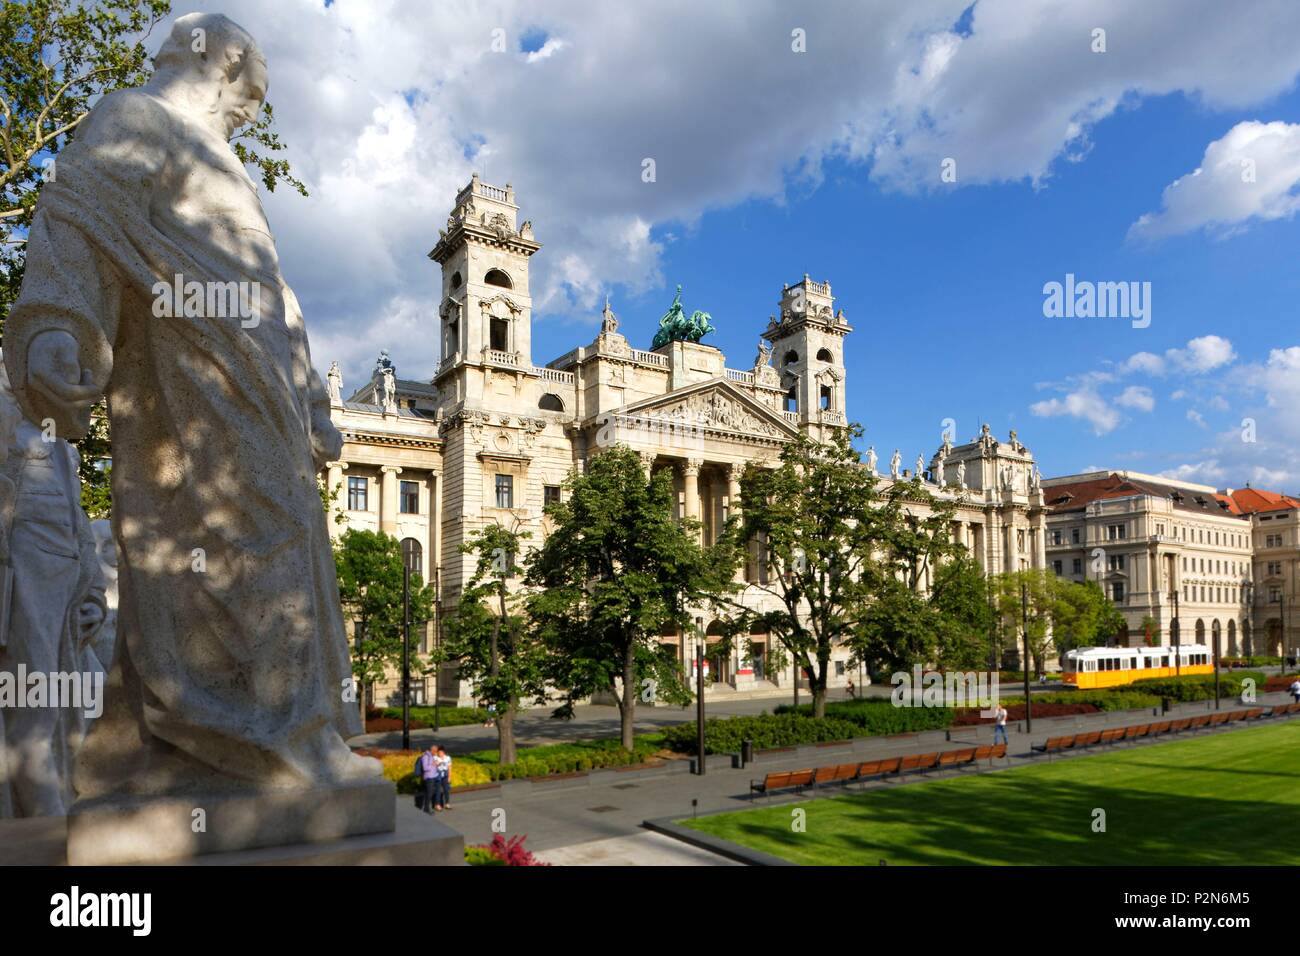 Budapest, Hungary, area classified as World Heritage, Pest, Kossuth Lajos square, the Ethnographic Museum (Néprajzi Múzeum) seen from the Kossuth Monument Stock Photo